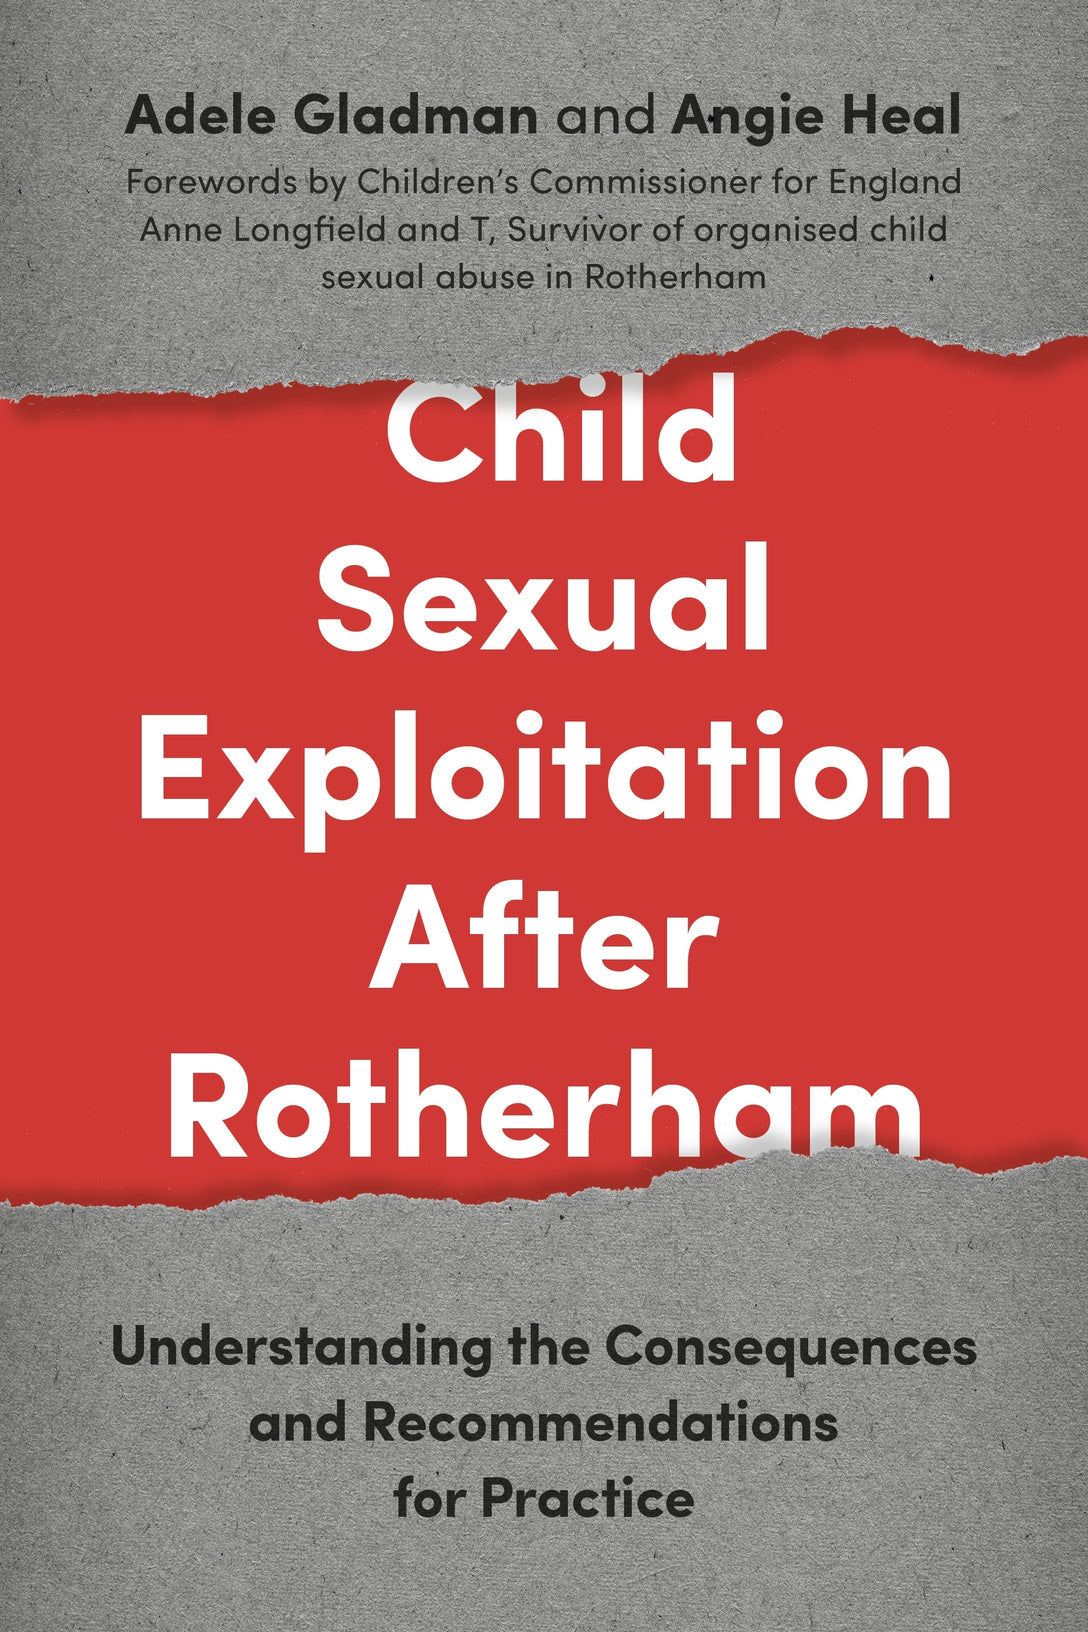 Child Sexual Exploitation After Rotherham by Anne Longfield, Angie Heal, Adele Gladman